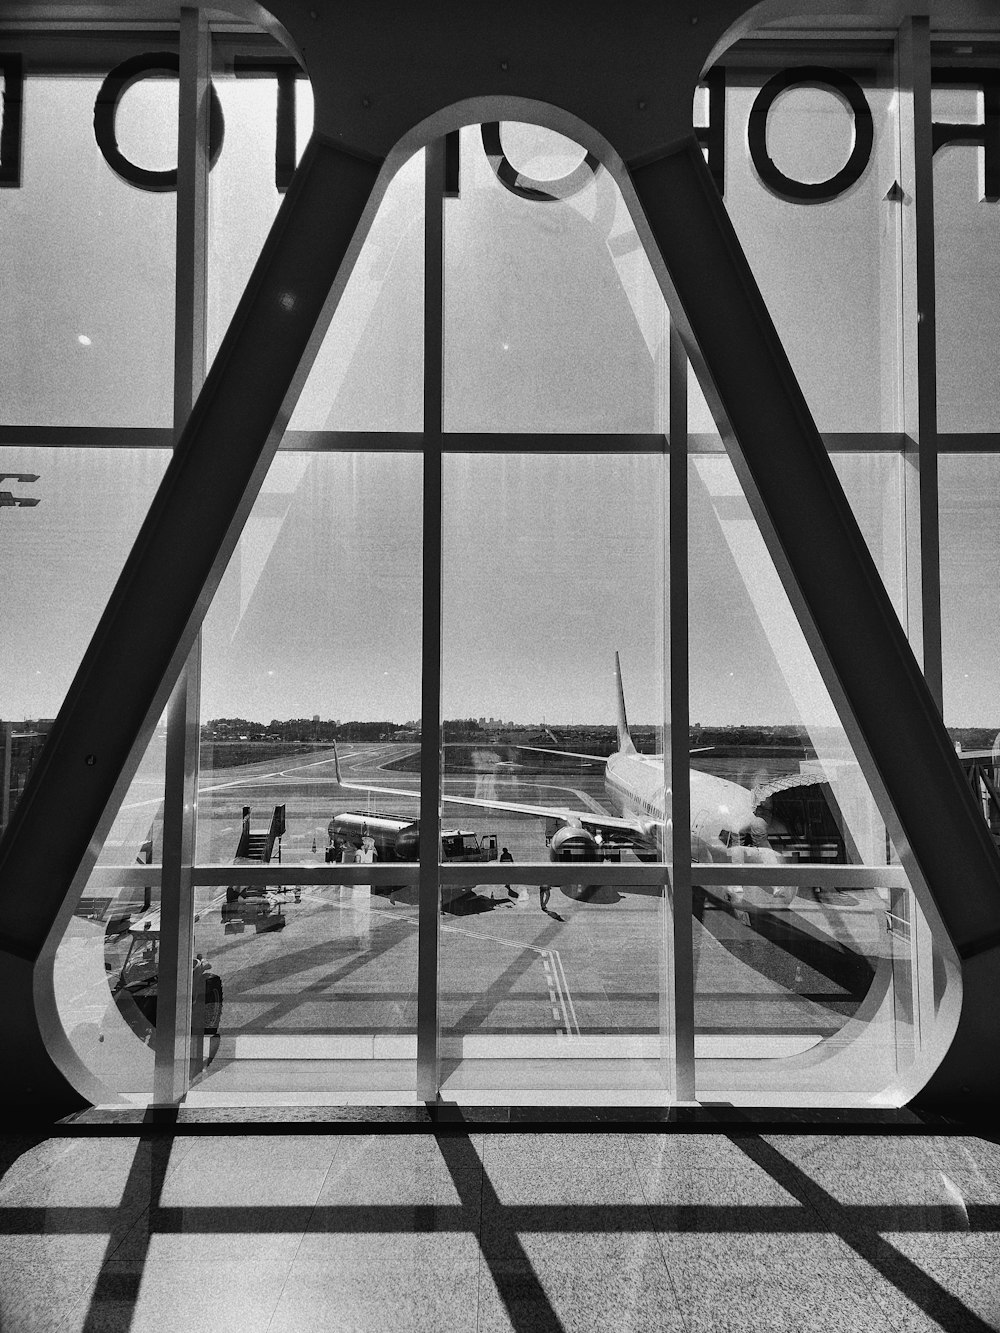 a black and white photo of an airport